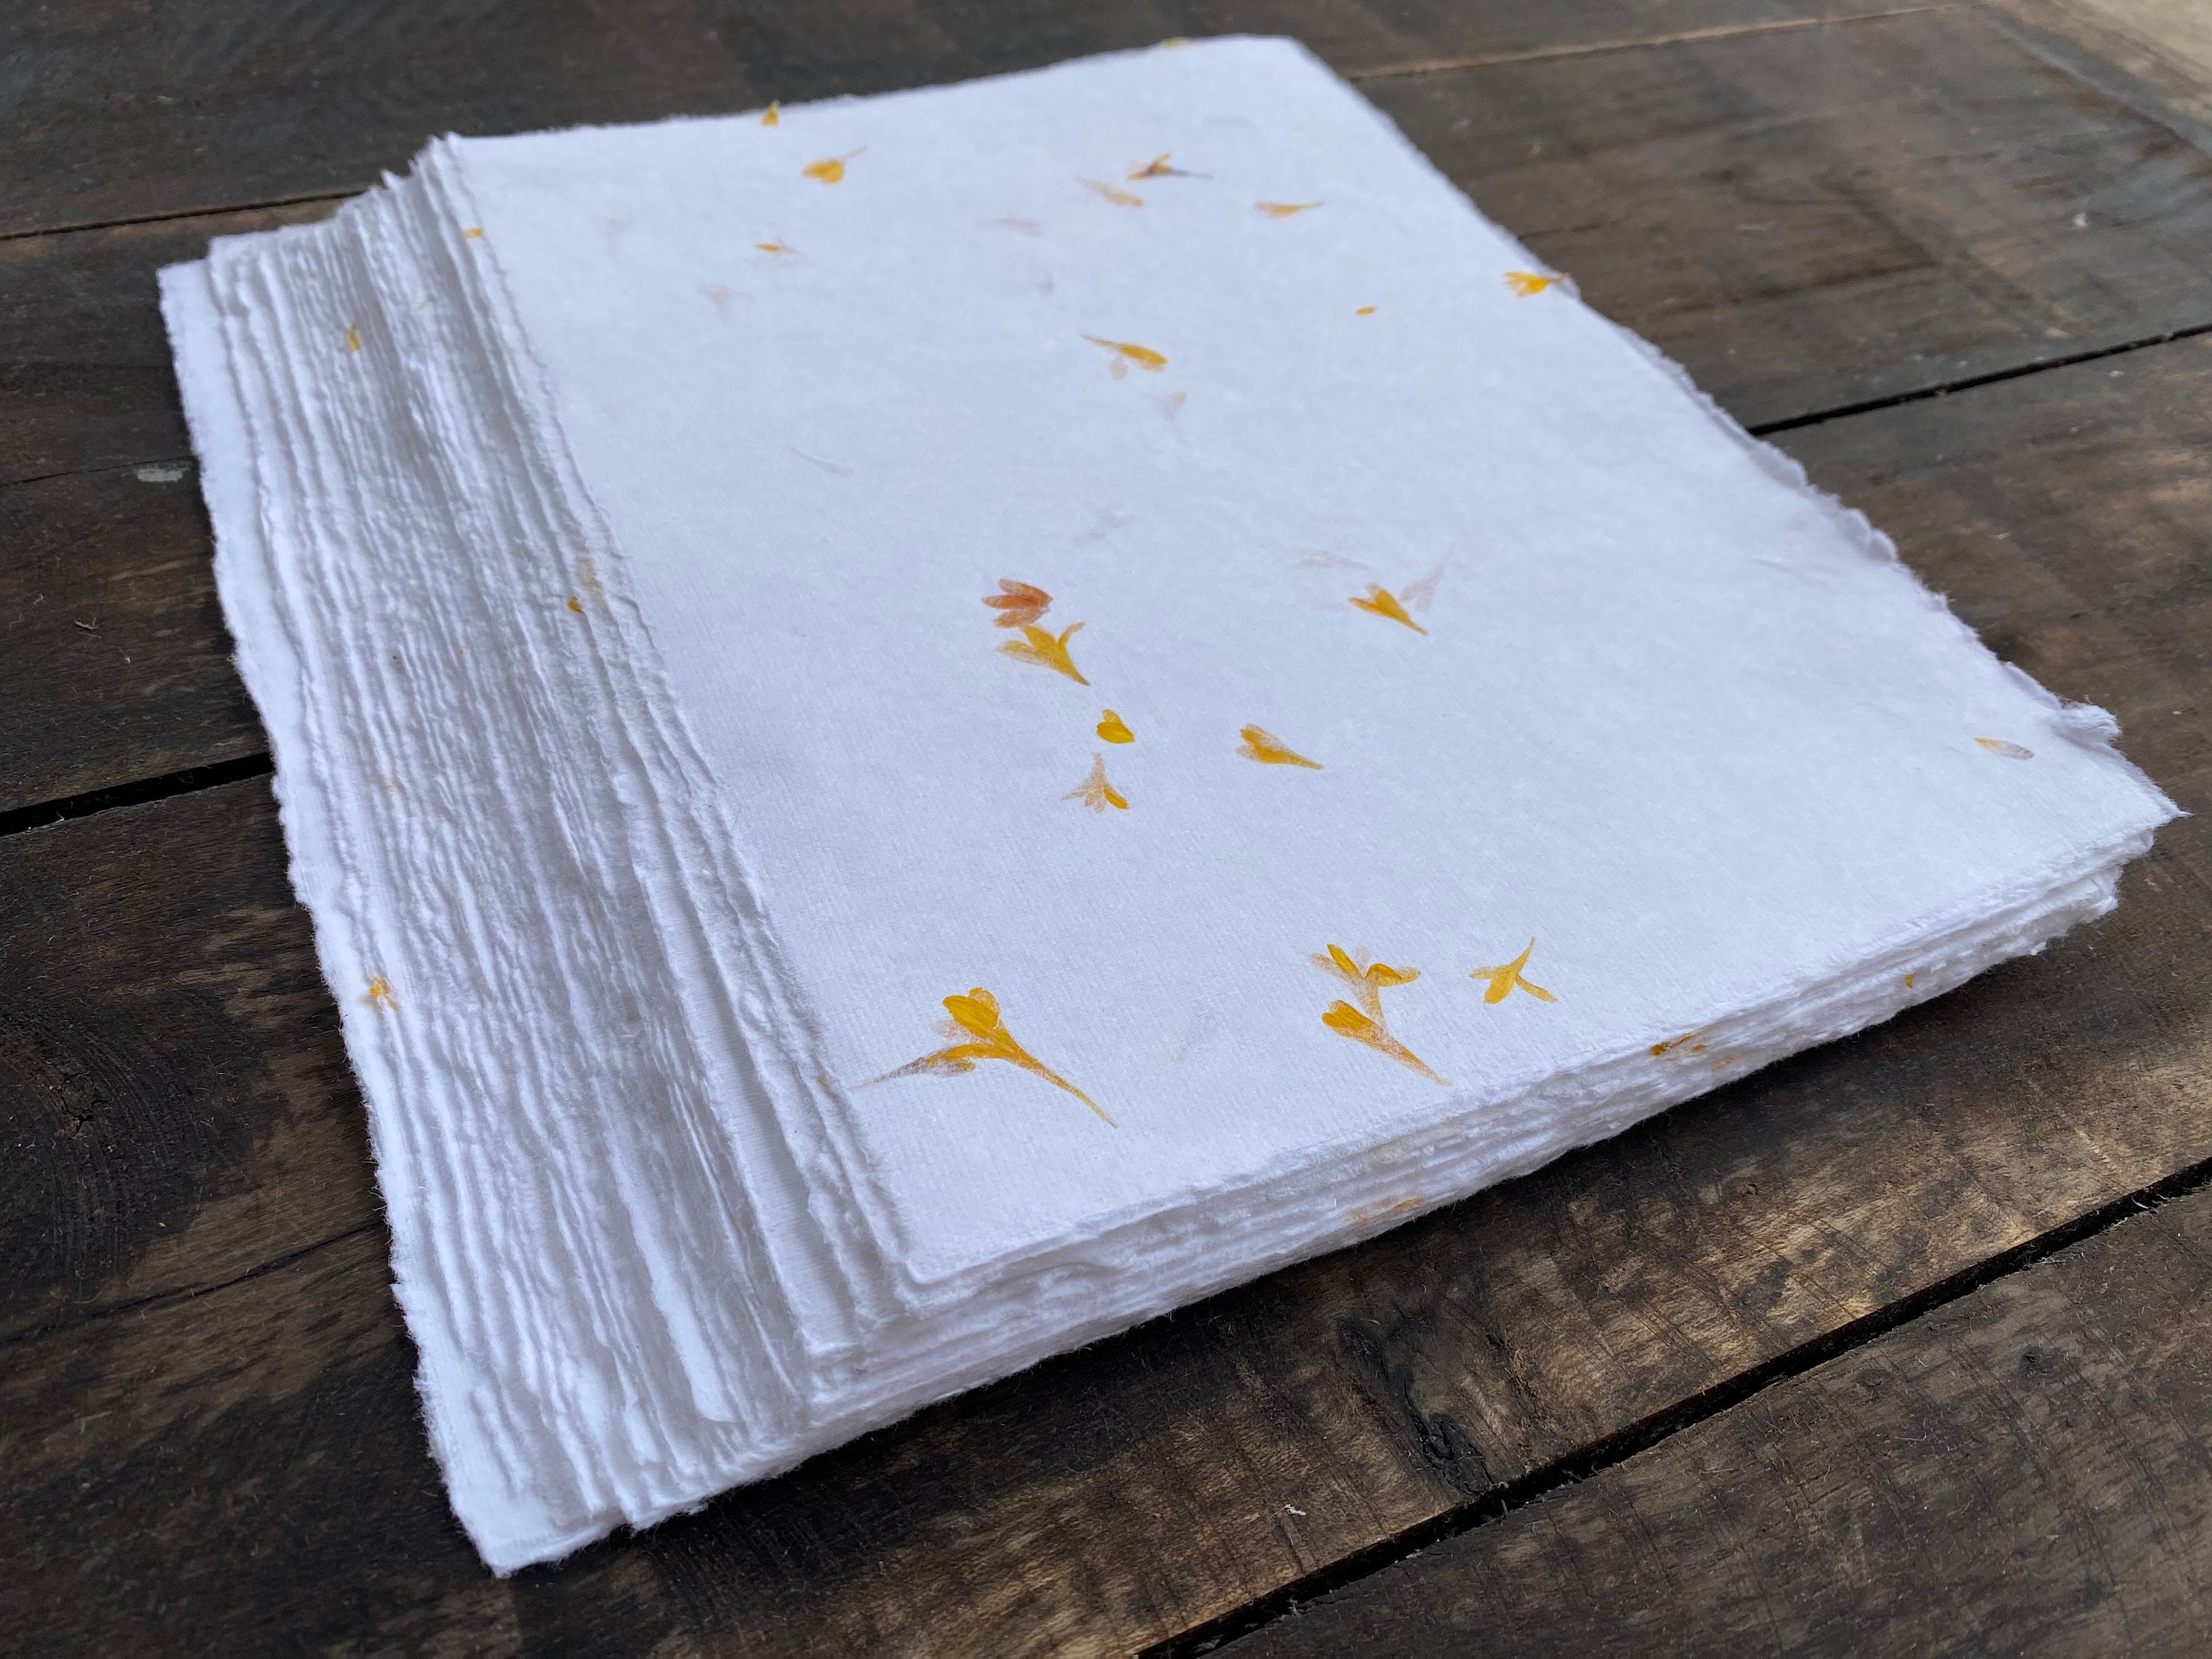 Handmade White Paper with Real Flower Petals and Deckle Edge